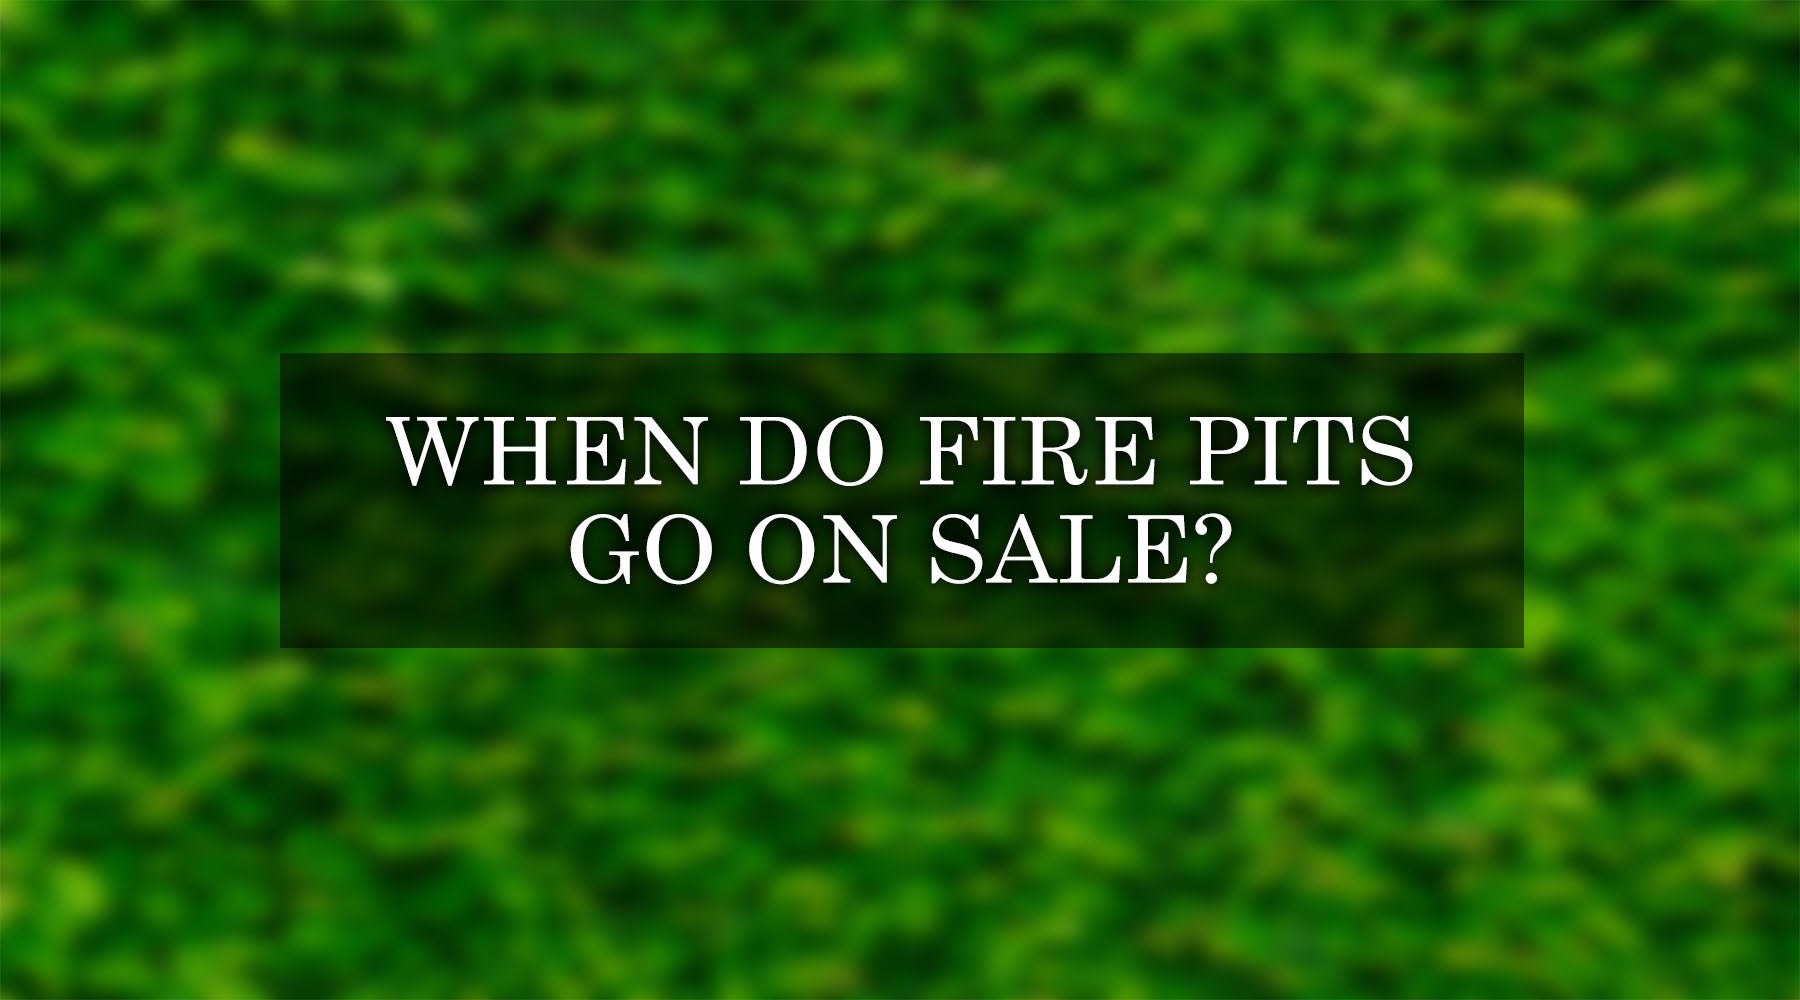 When Do Fire Pits Go On Sale? Best Time to Buy